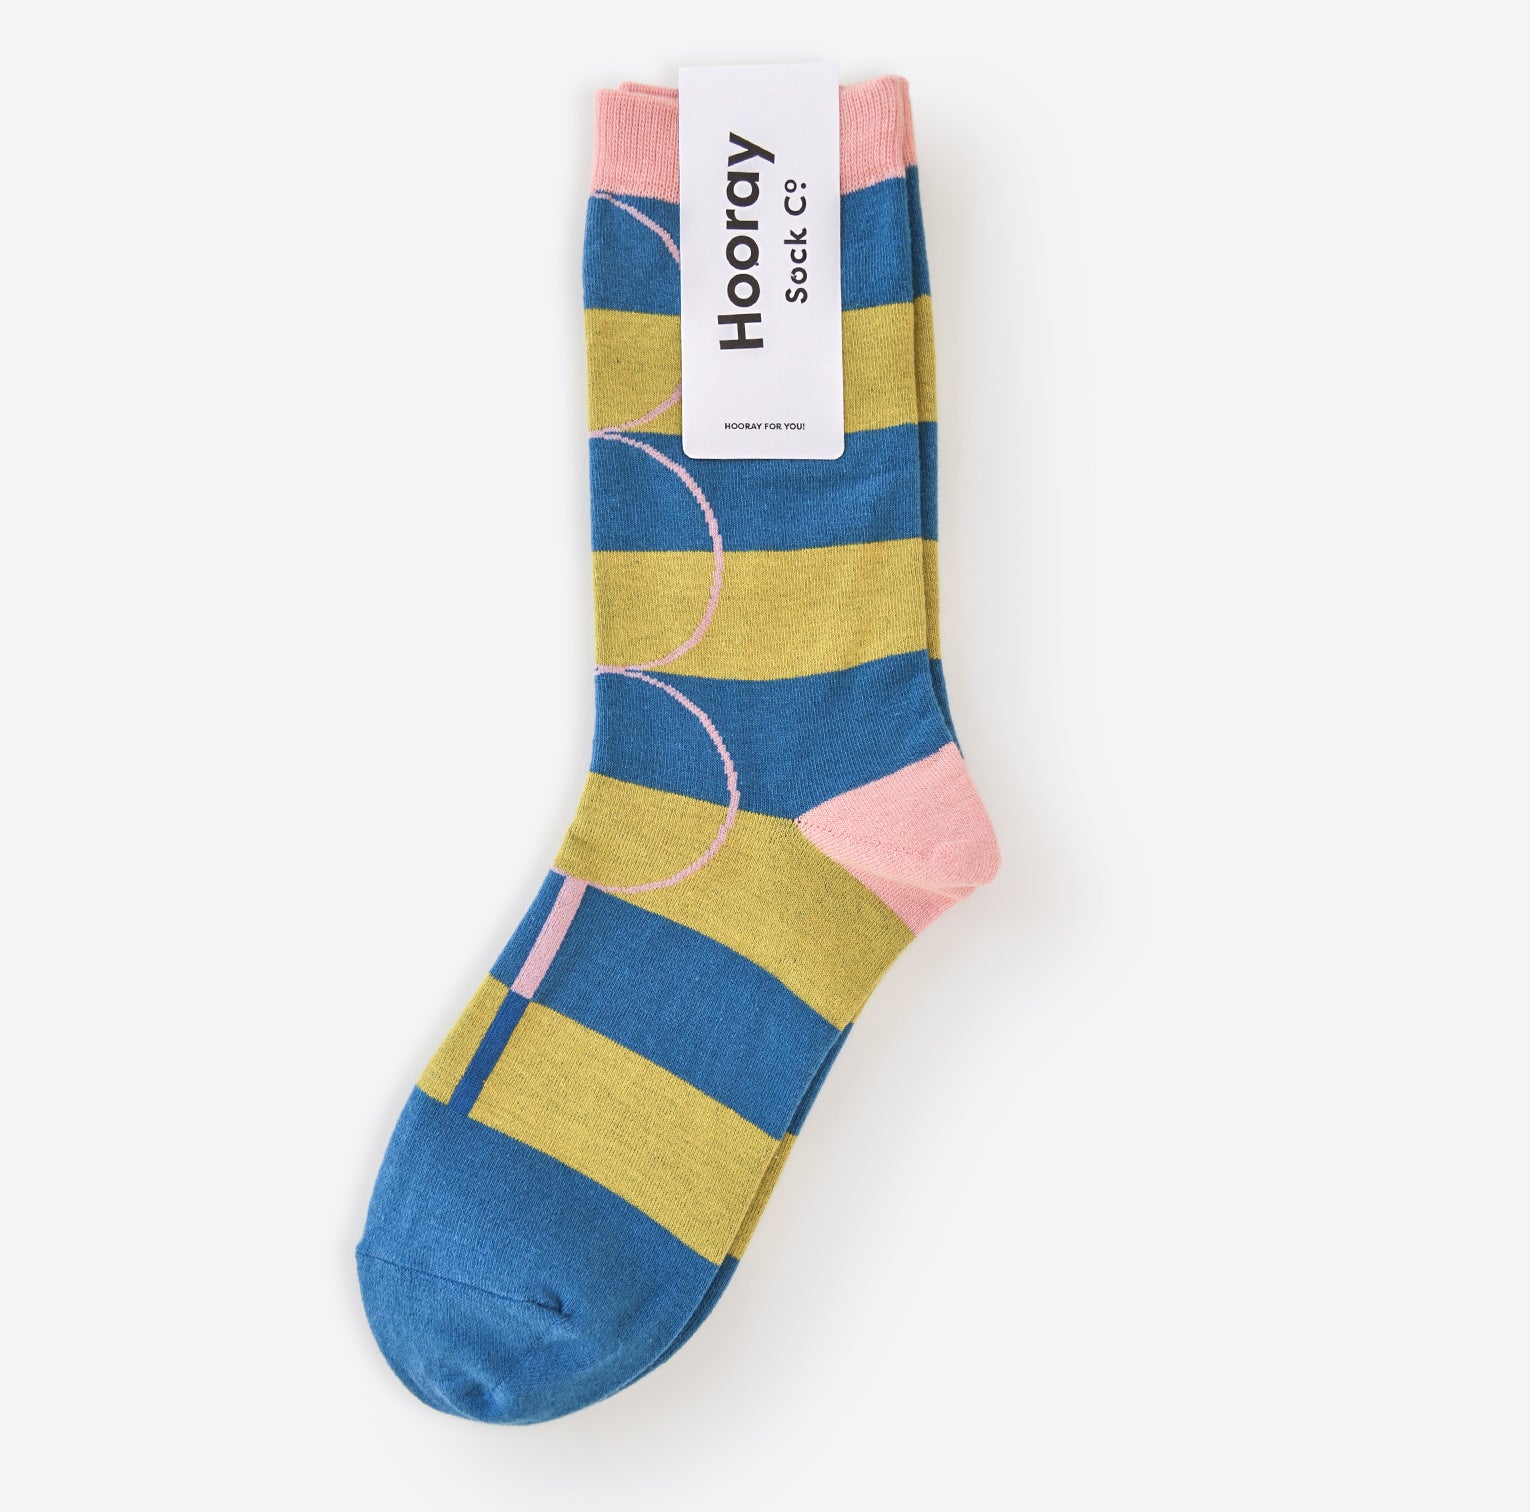 Hooray Sock Co. Polk Blue and Green Stripe Crew Socks. Groovy striped design with big circles. Crew length, 80% cotton, 20% spandex. Sizes: Large (US men’s 8-12), Small (US women&#39;s 4-10). 